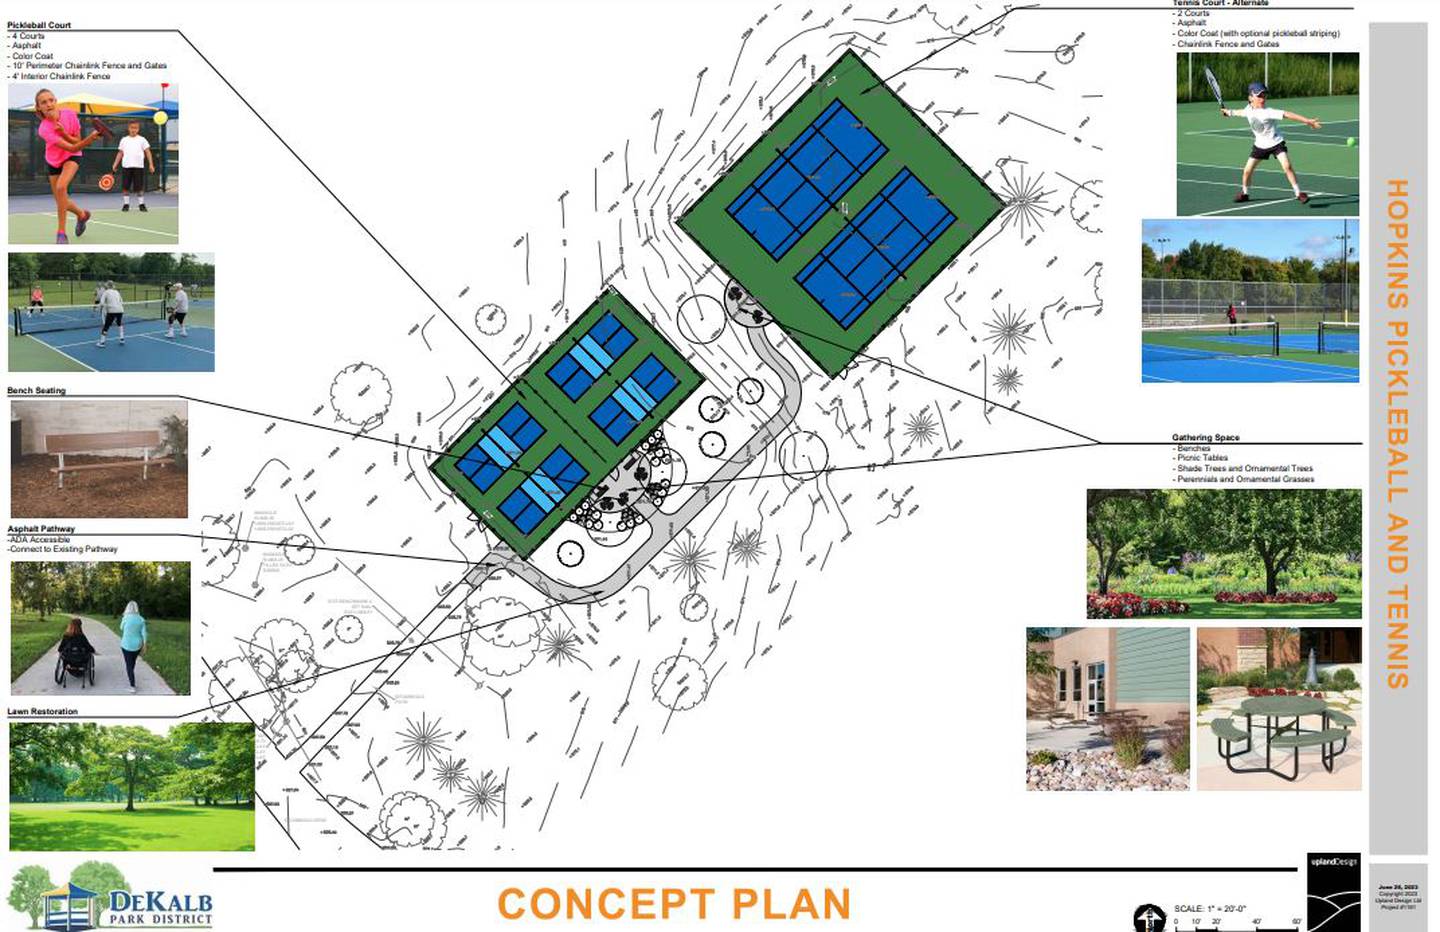 Hopkins Park tennis and pickleball courts concept plan